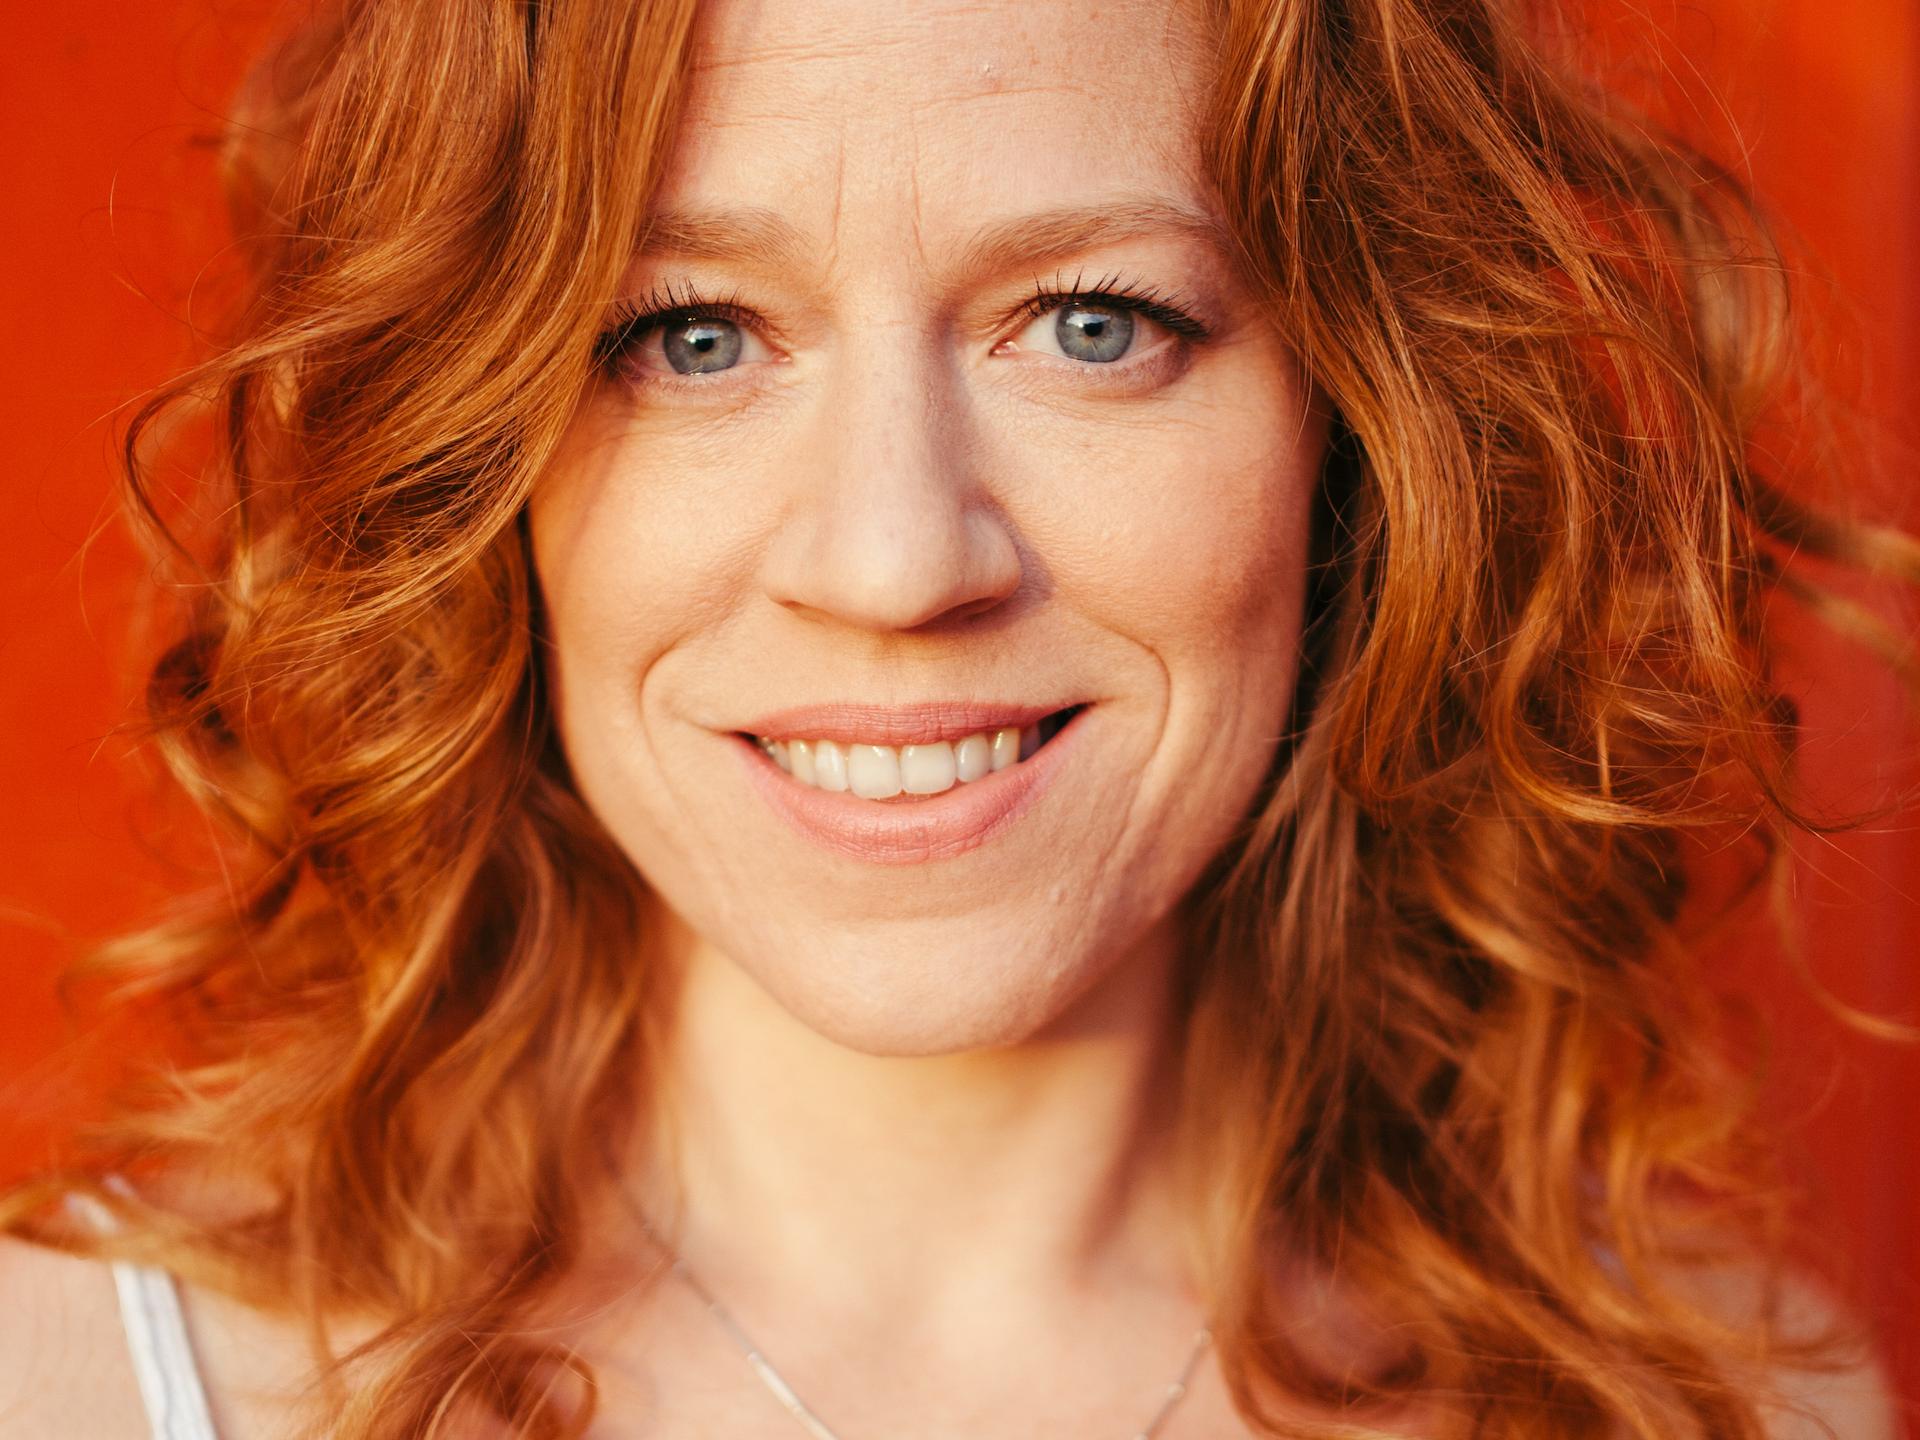 Woman with red hair smiling wearing a white vest with a necklace